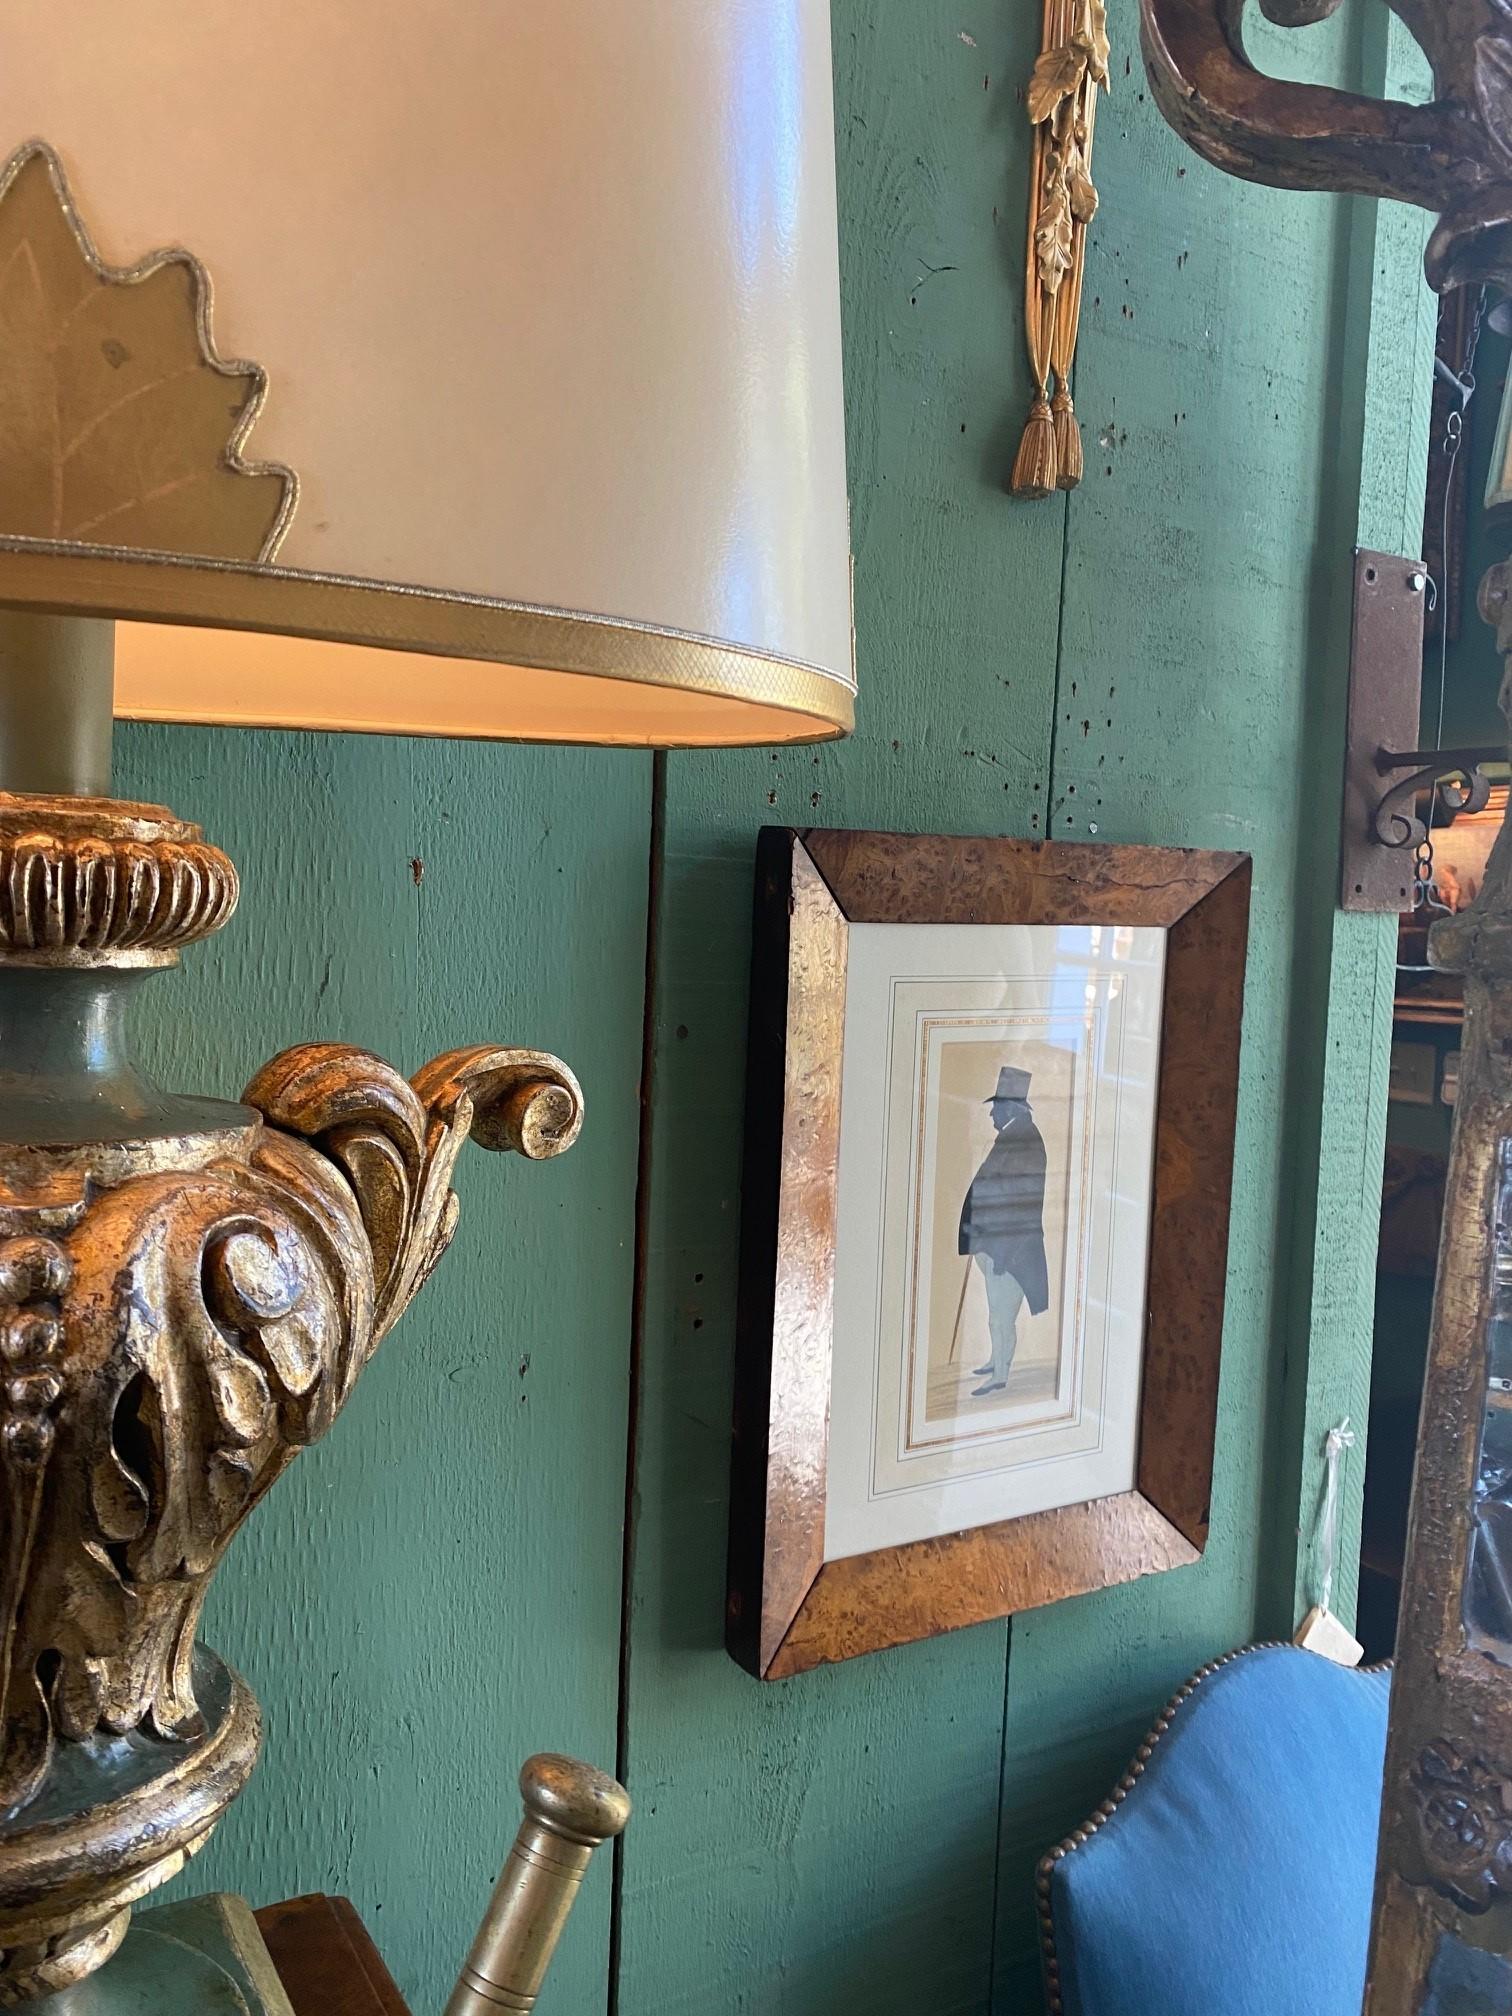 This Silhouette portrays the 19th century gentleman With his pointy cane. This item has been well taken care of and has minor wear consistent with its age. Wall art silhouette of an older Gentleman framed in a Thuya Burl or possible bird's-eye